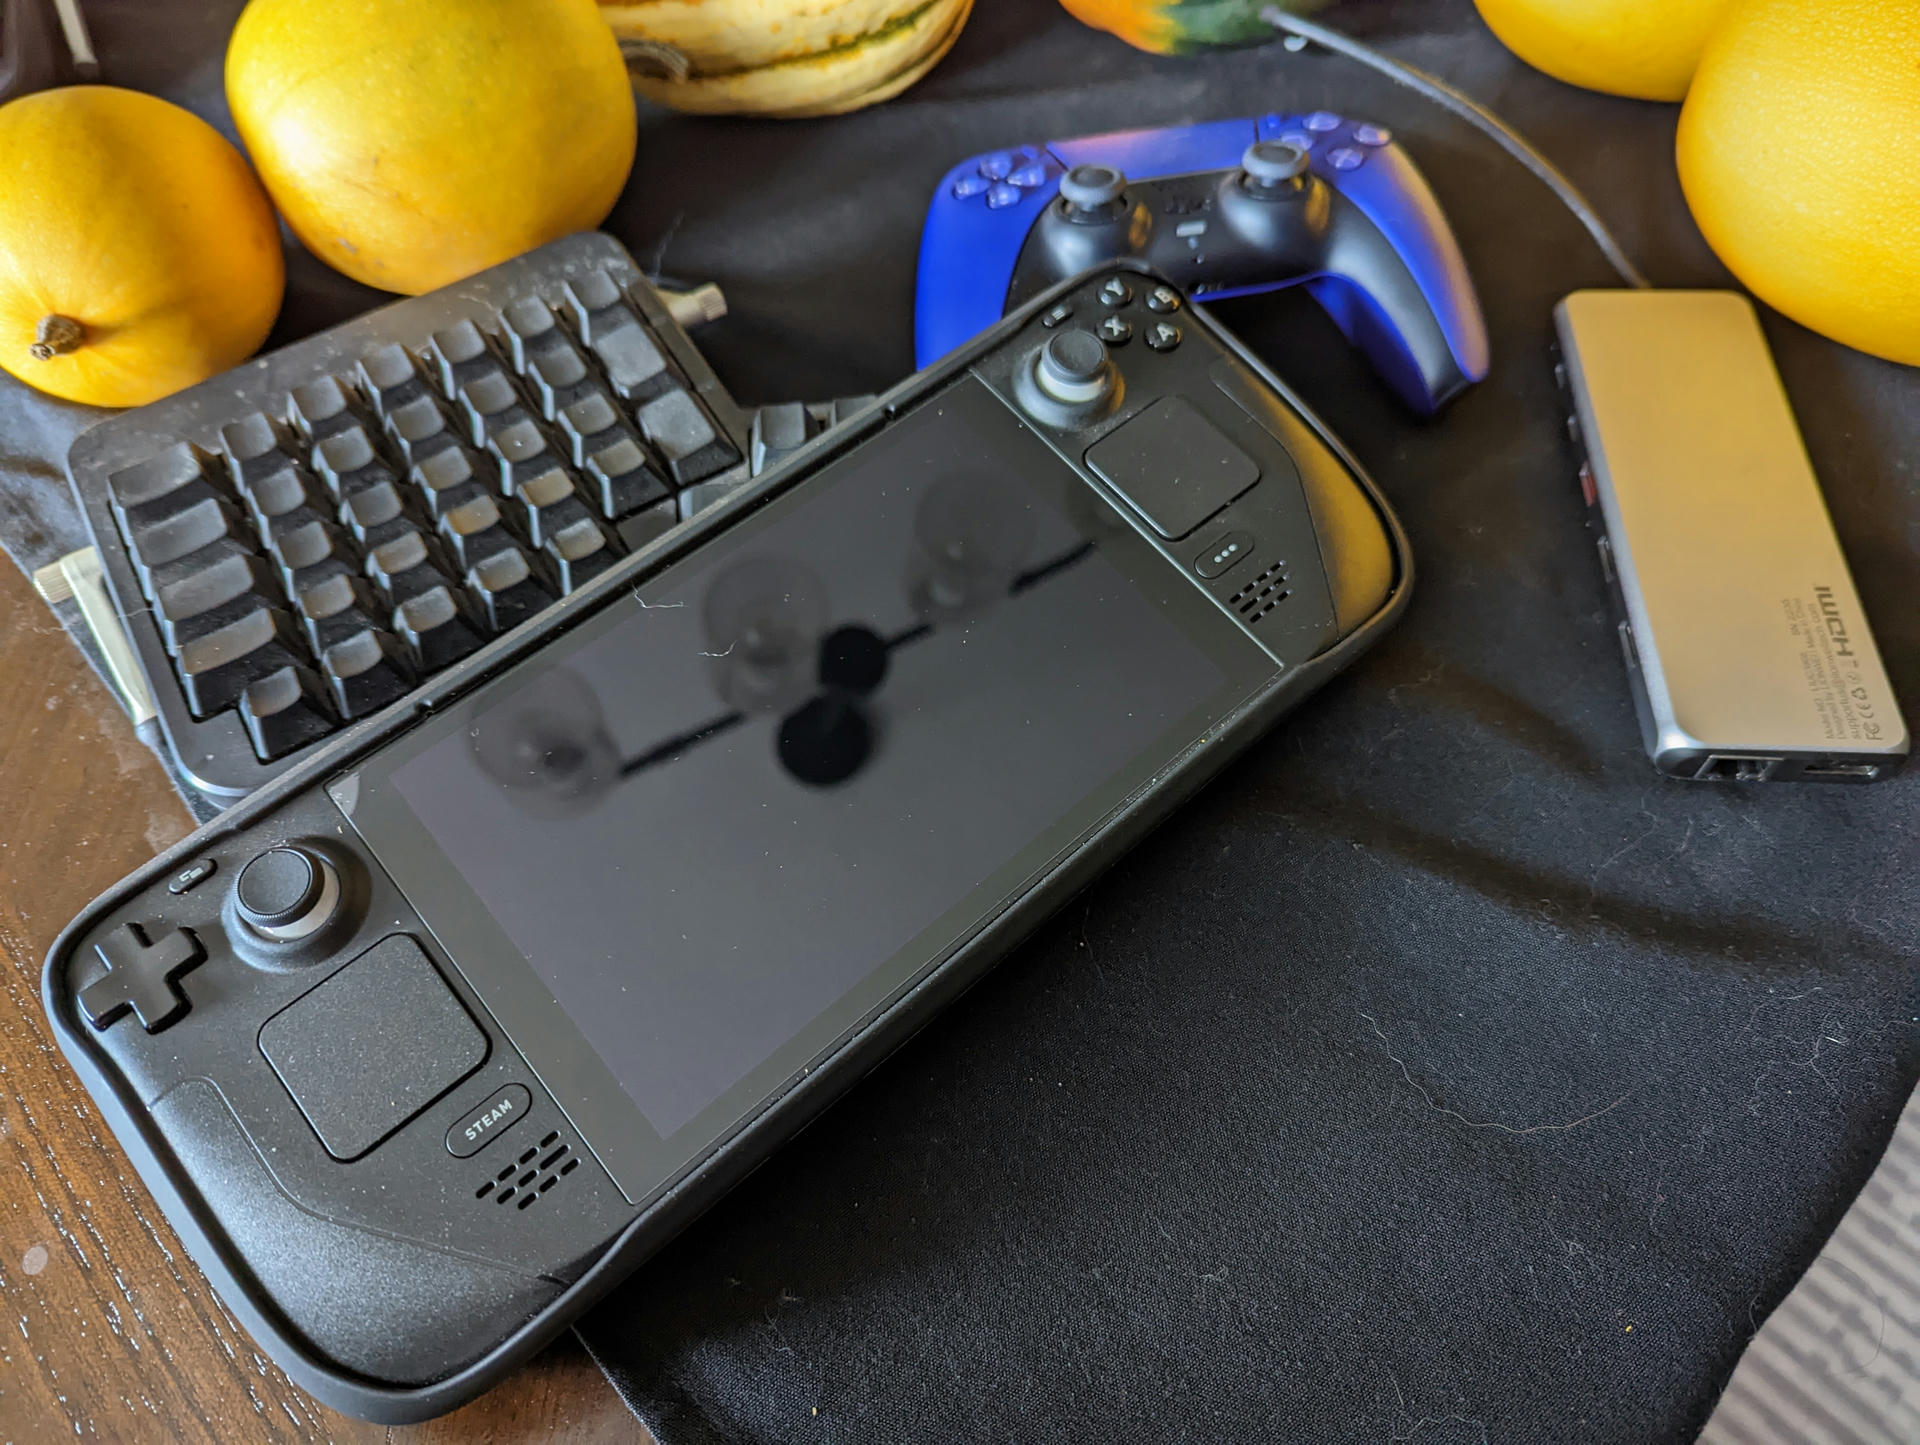 My Deck, alongside the peripherals I use with it: PS5 Controller, a USB-C hub, and an Ergodox.